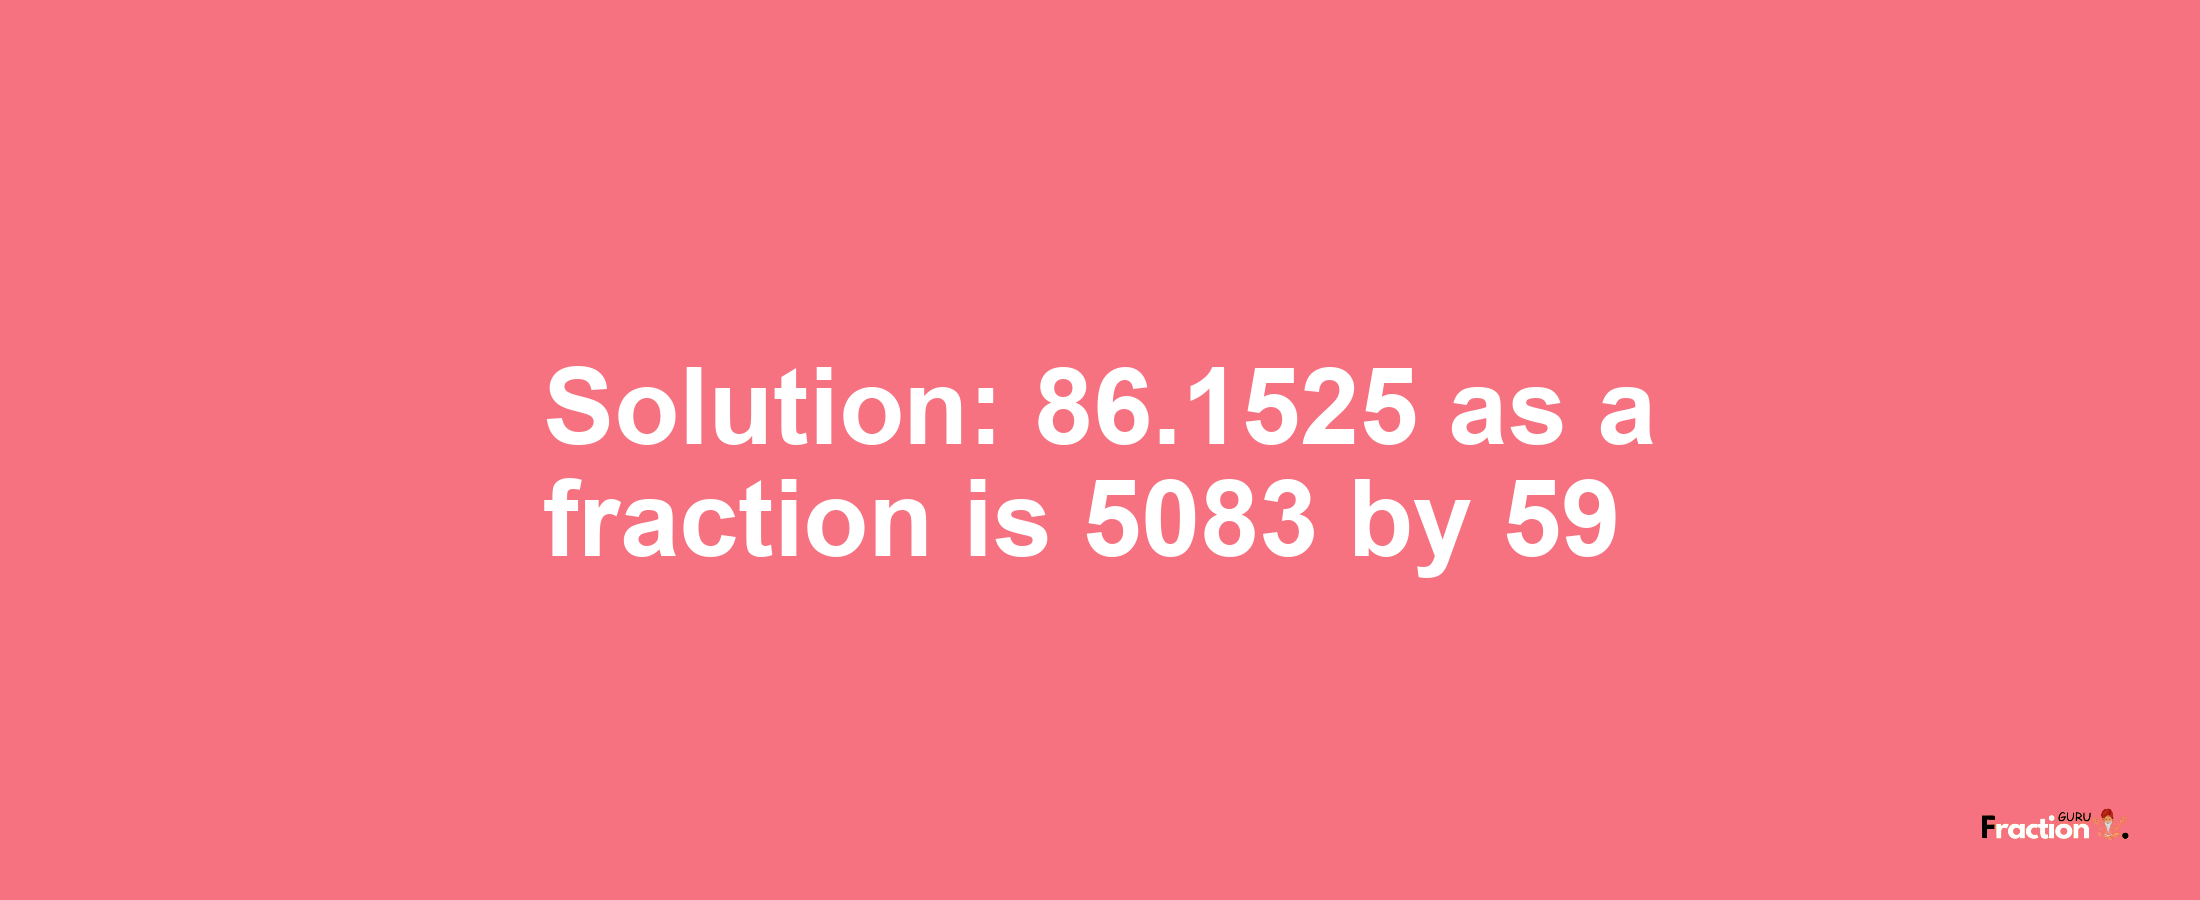 Solution:86.1525 as a fraction is 5083/59